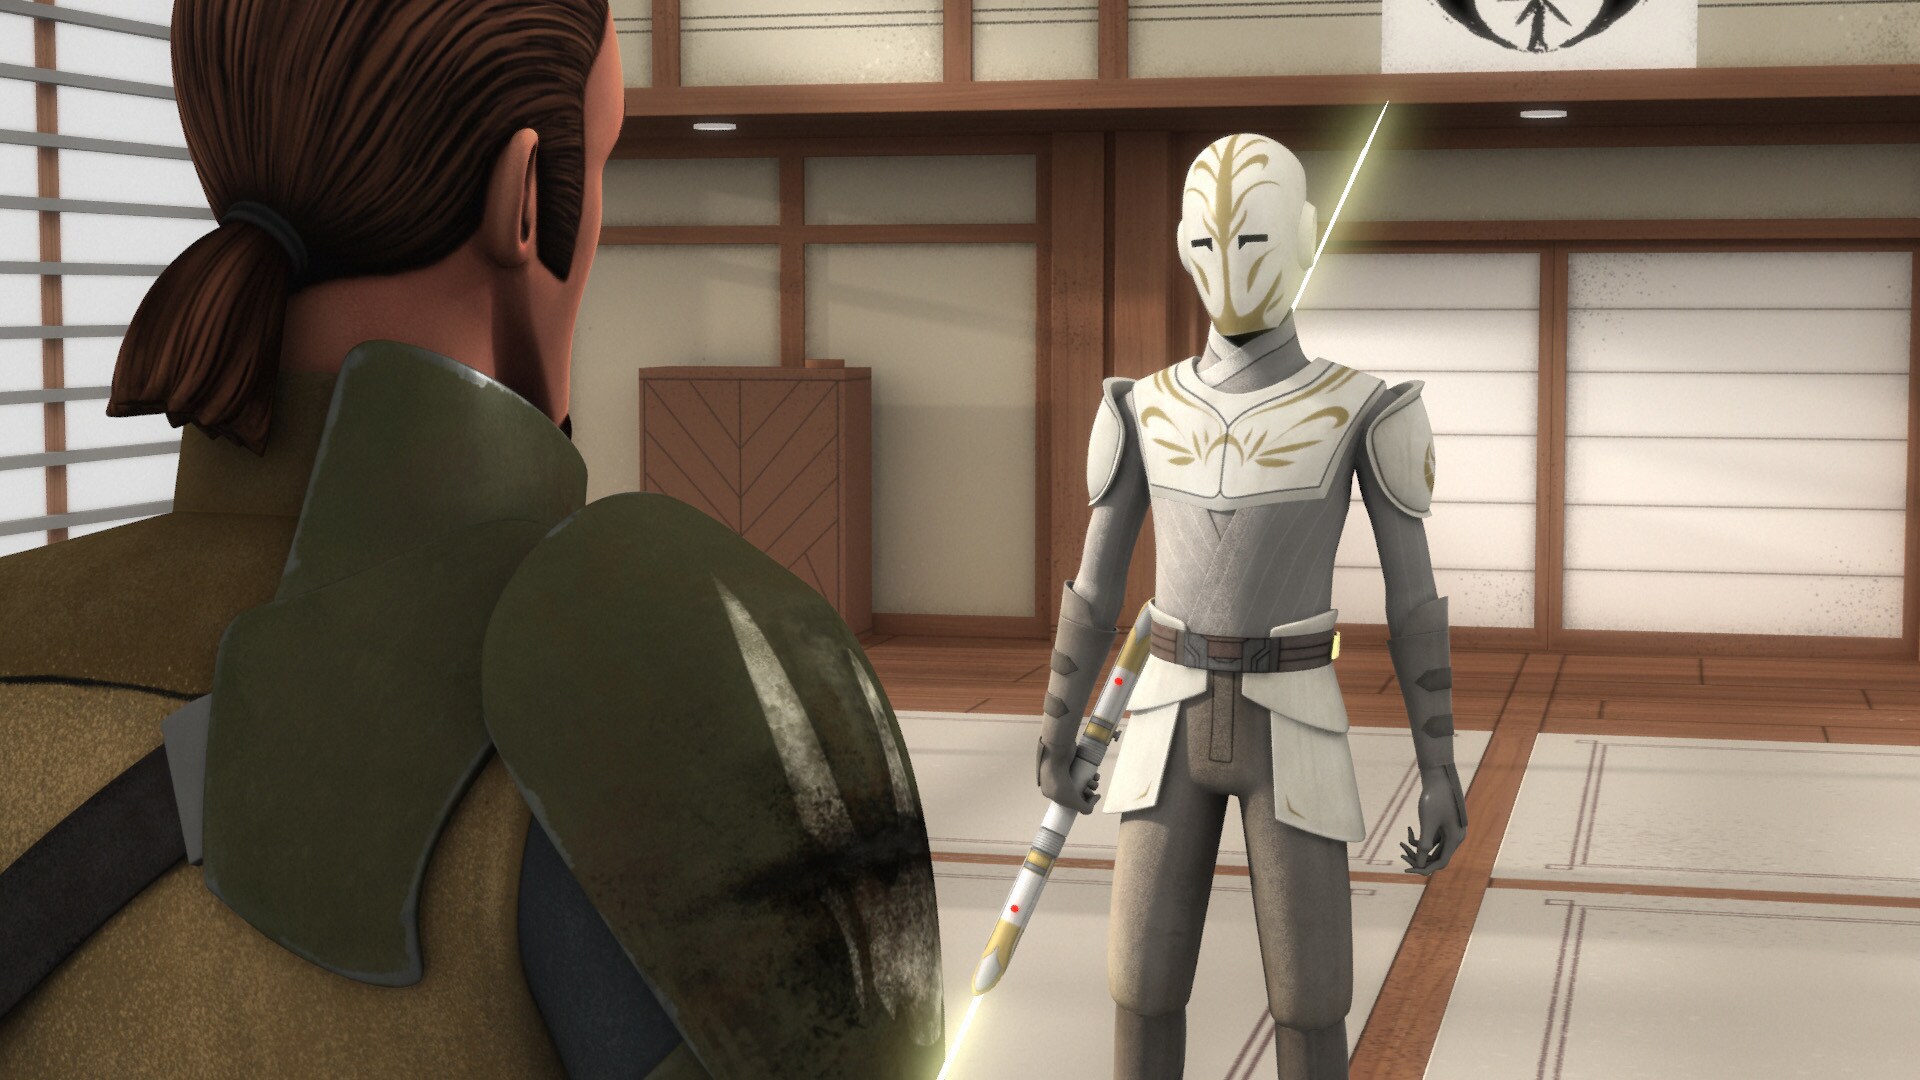 On the other side, Kanan finds himself in a combat training room. A Temple Guard awaits. The Jedi...